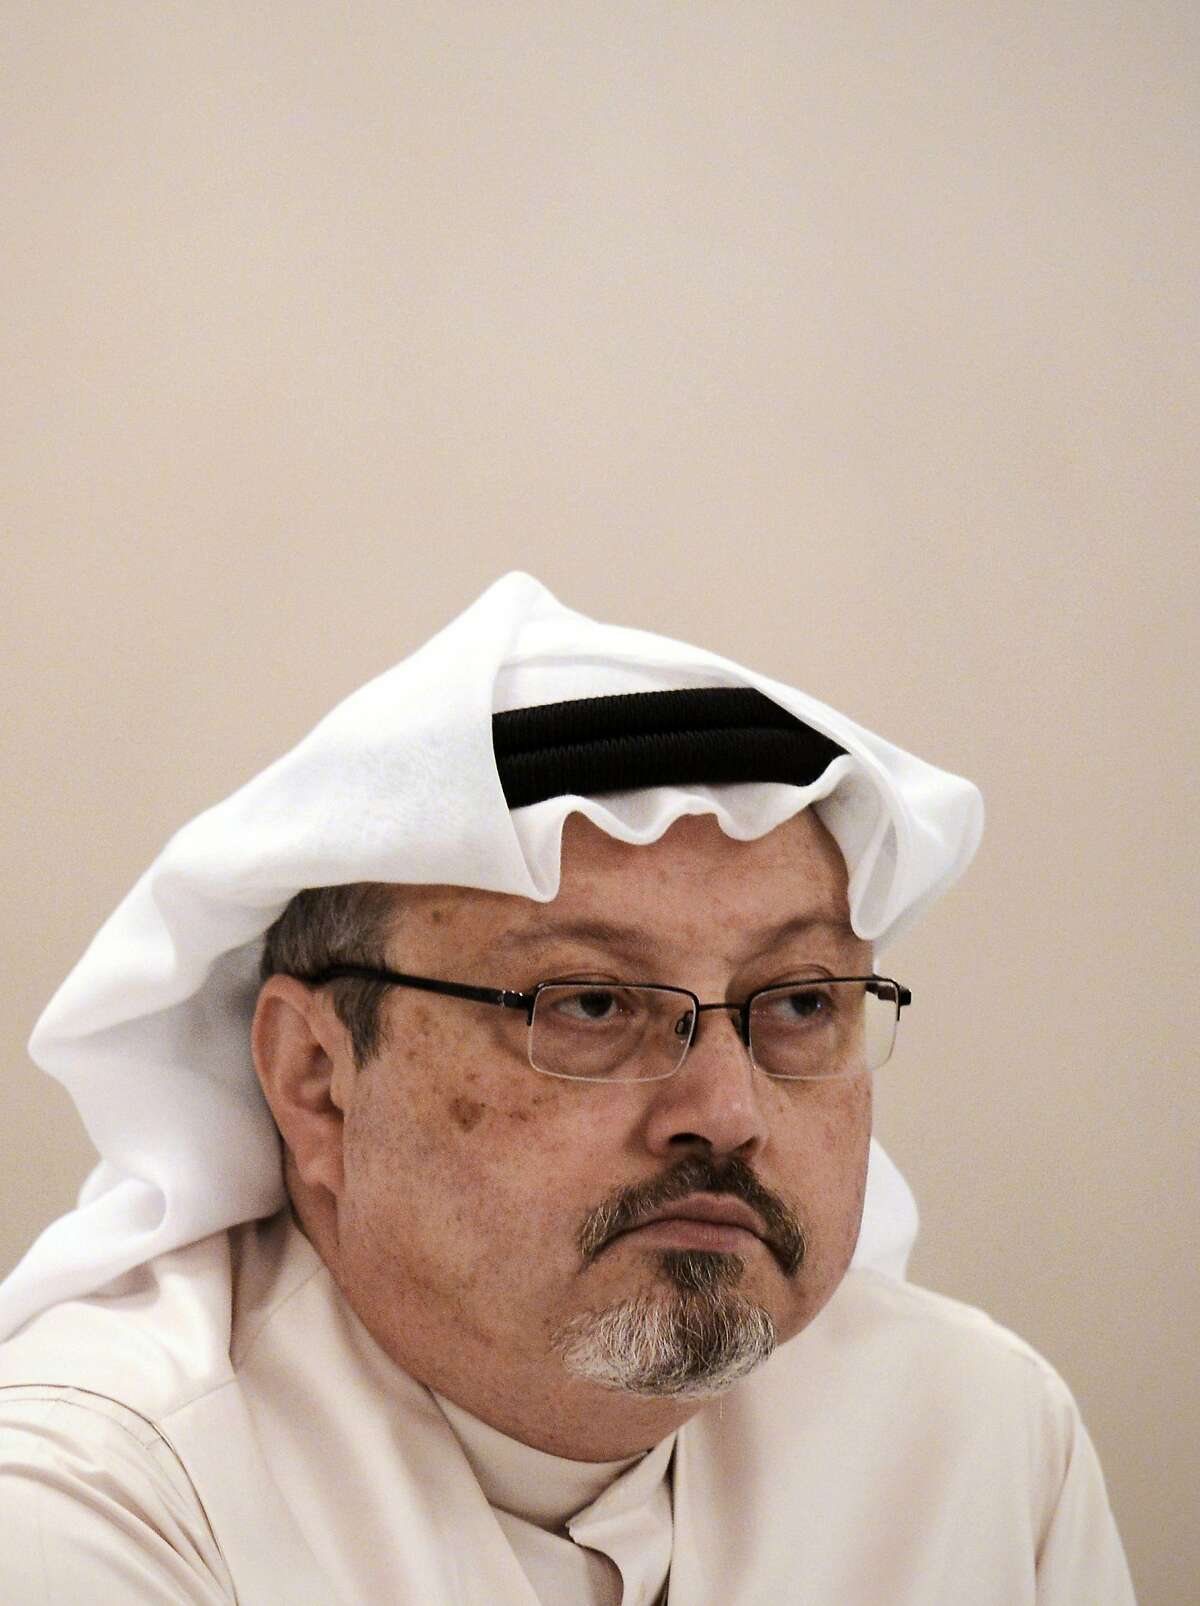 In this file photo taken on December 15, 2014, general manager of Alarab TV, Jamal Khashoggi, looks on during a press conference in the Bahraini capital Manama. - The veteran Saudi journalist who has been critical of the government has gone missing after visiting the kingdom's consulate in Istanbul on September 2, 2018, the Washington Post reported. Khashoggi, a former government advisor who went into self-imposed exile in the United States last year to avoid possible arrest, has been critical of some of the policies of Saudi Crown Prince Mohammed bin Salman and Riyadh's intervention in the war in Yemen. (Photo by MOHAMMED AL-SHAIKH / AFP)MOHAMMED AL-SHAIKH/AFP/Getty Images